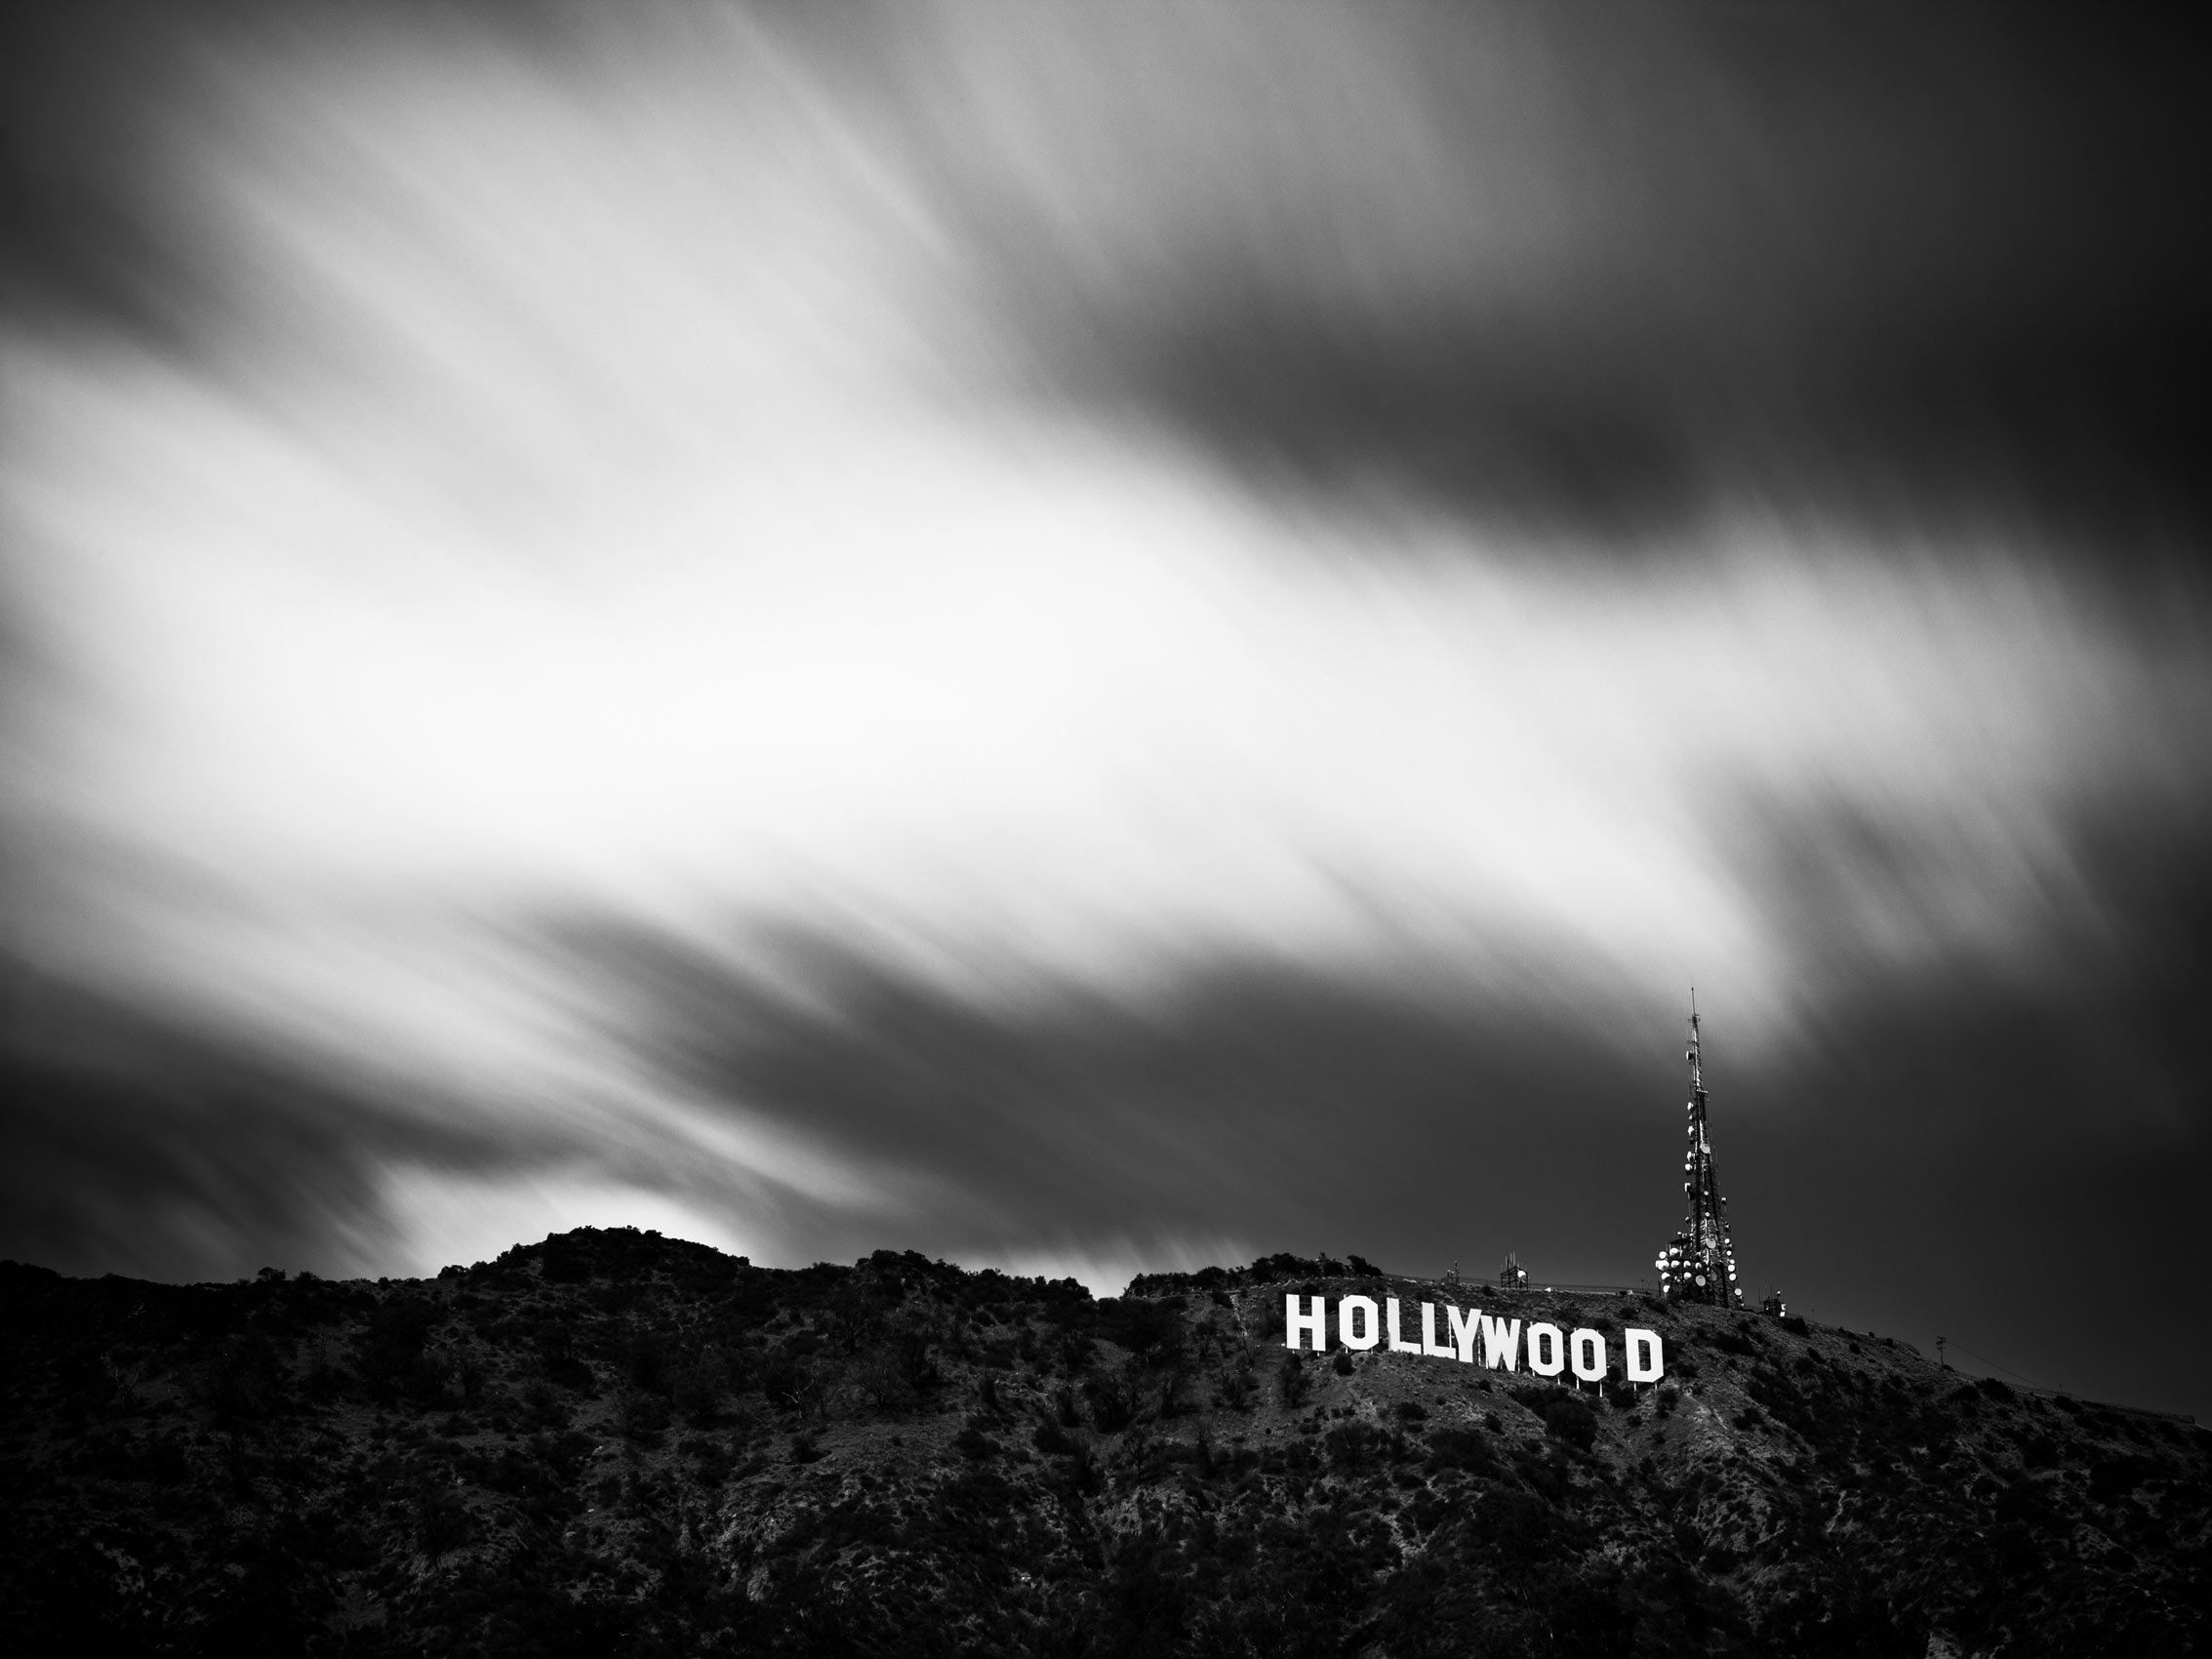 211012_038-150430_HollywoodSign-0014-BW-FInal